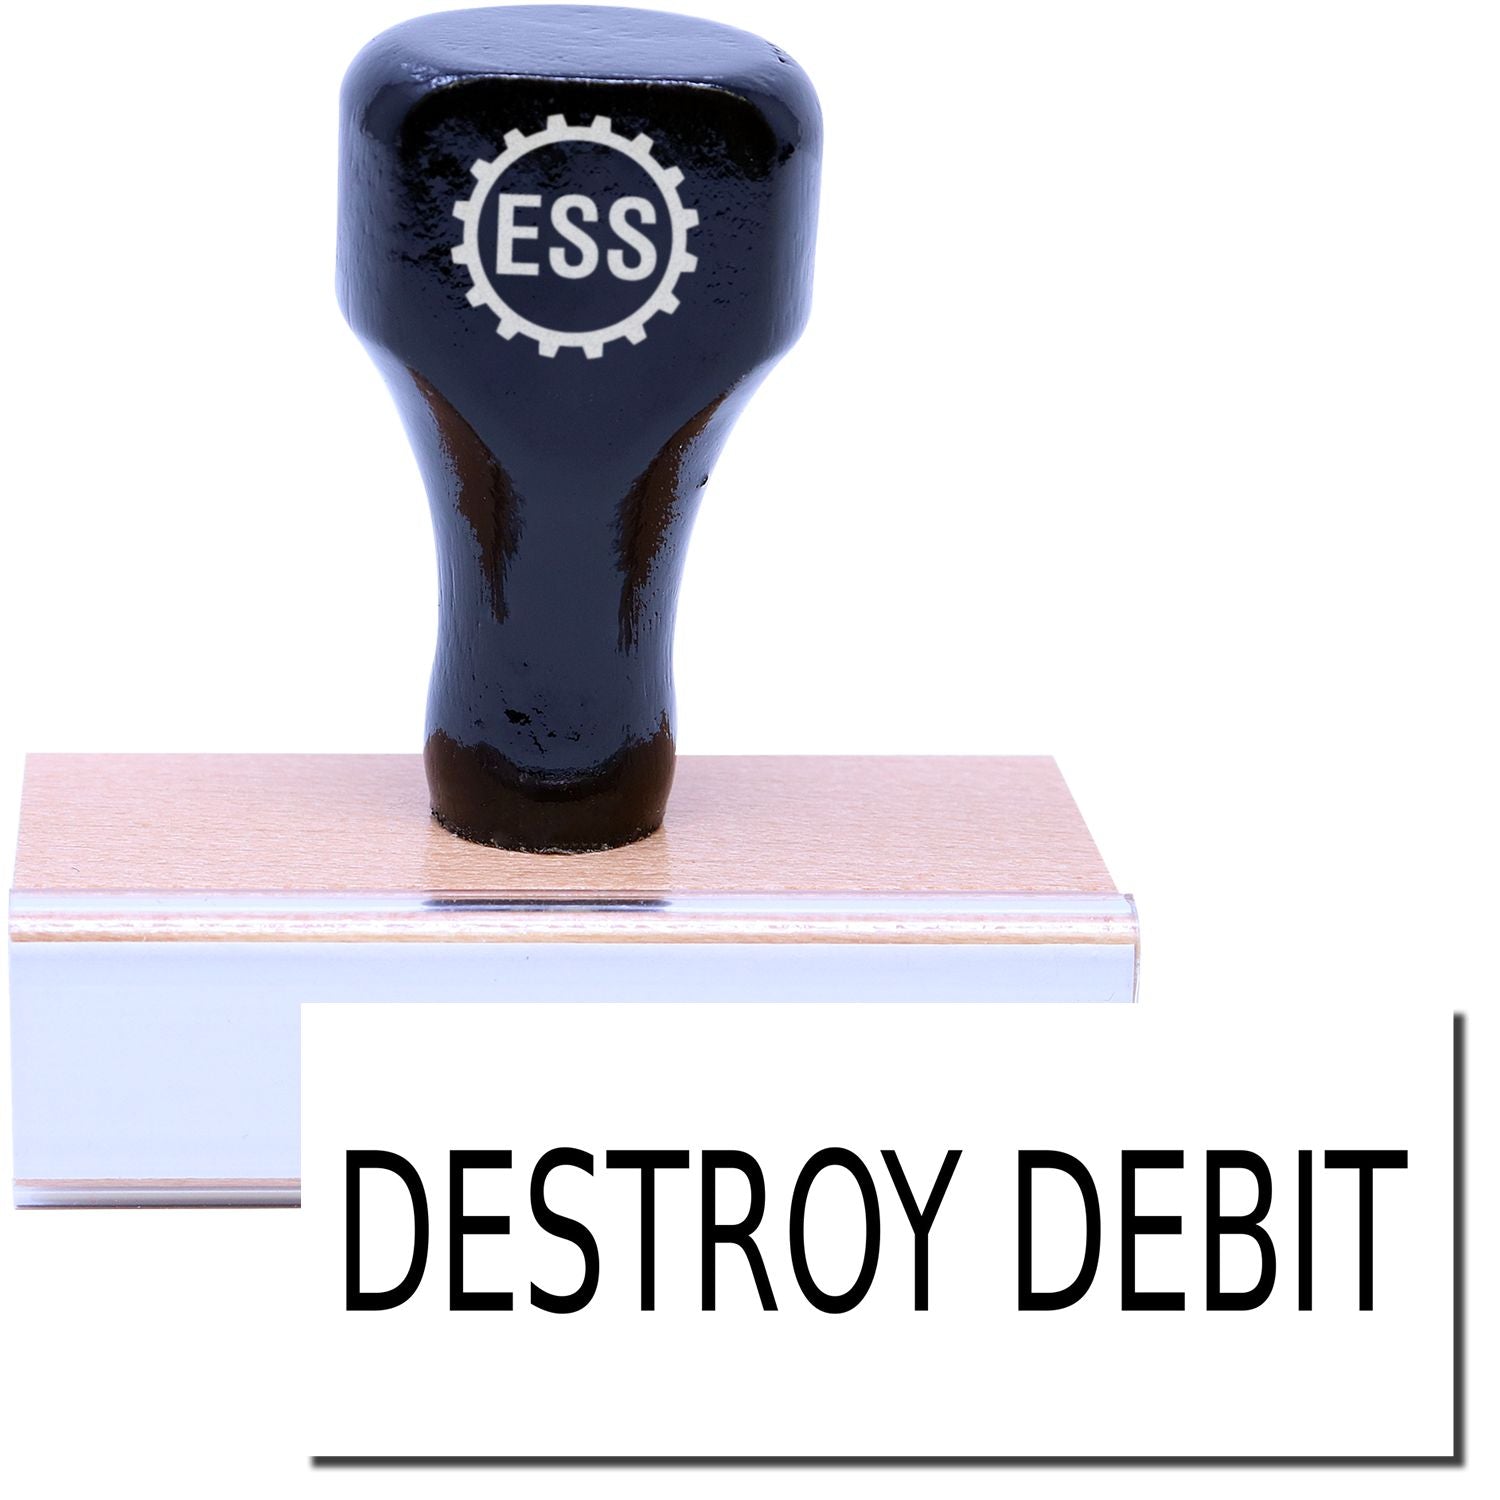 A stock office rubber stamp with a stamped image showing how the text "DESTROY DEBIT" is displayed after stamping.